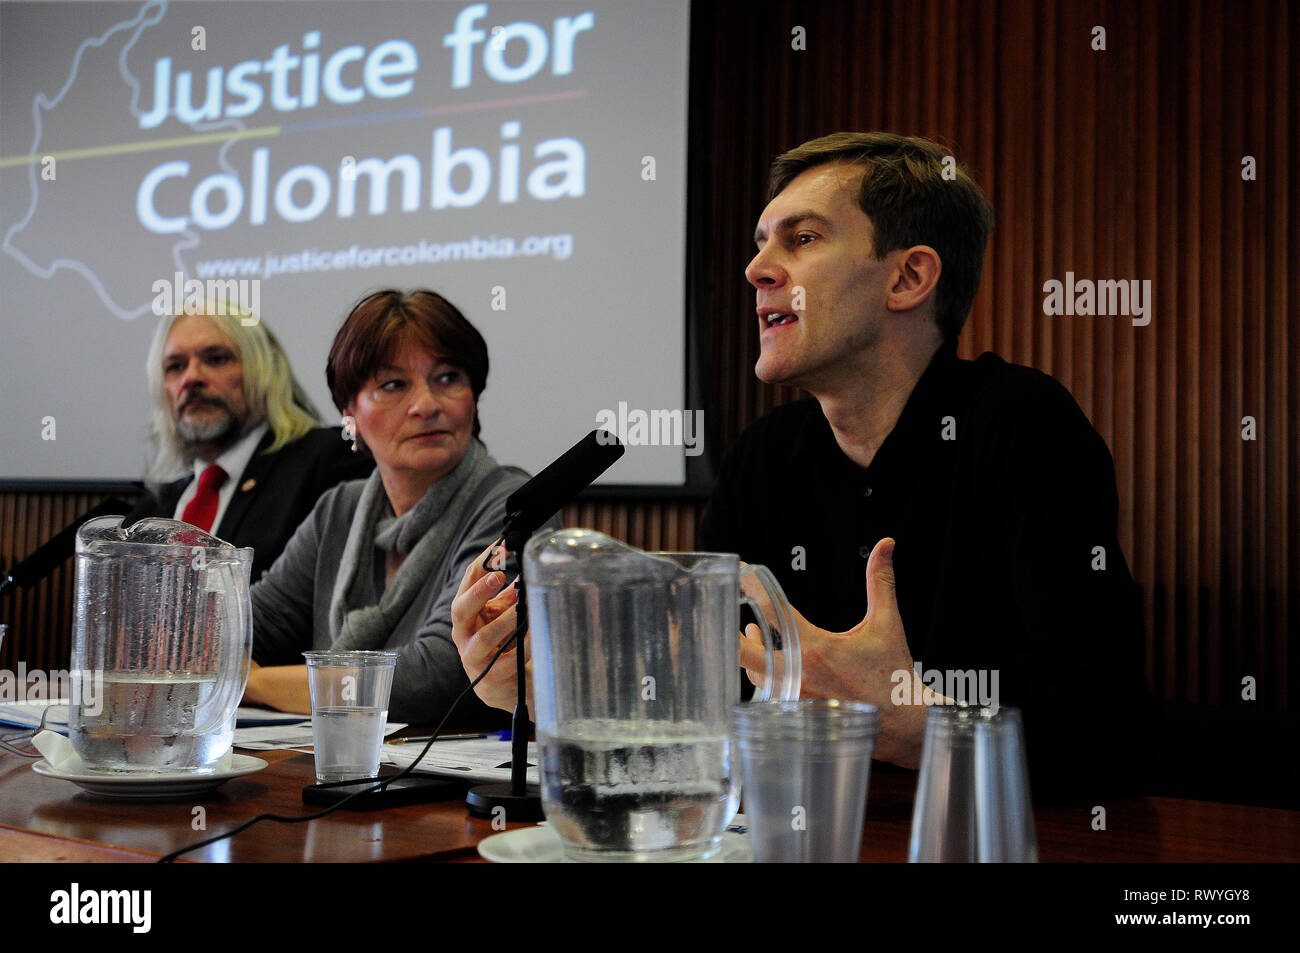 London, England. 29th November, 2014 Seumas Milne, journalist and writer, speaking during a 'Justice for Columbia' workshop at the annual Latin Americ Stock Photo